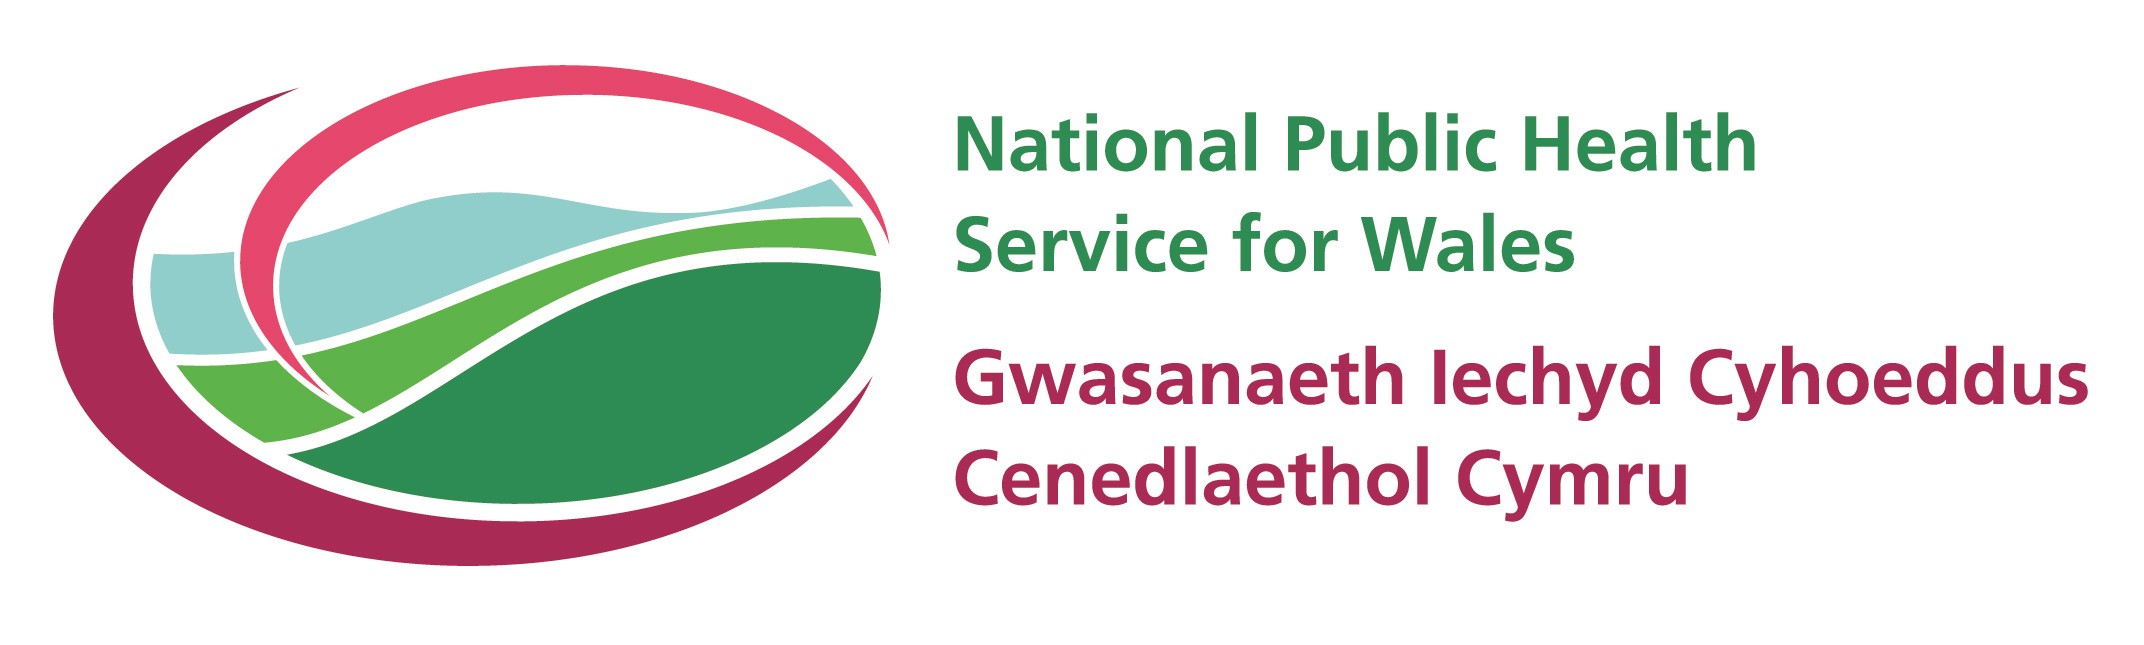 NATIONAL PUBLIC HEALTH SERVICE FOR WALES A RAPID REVIEW